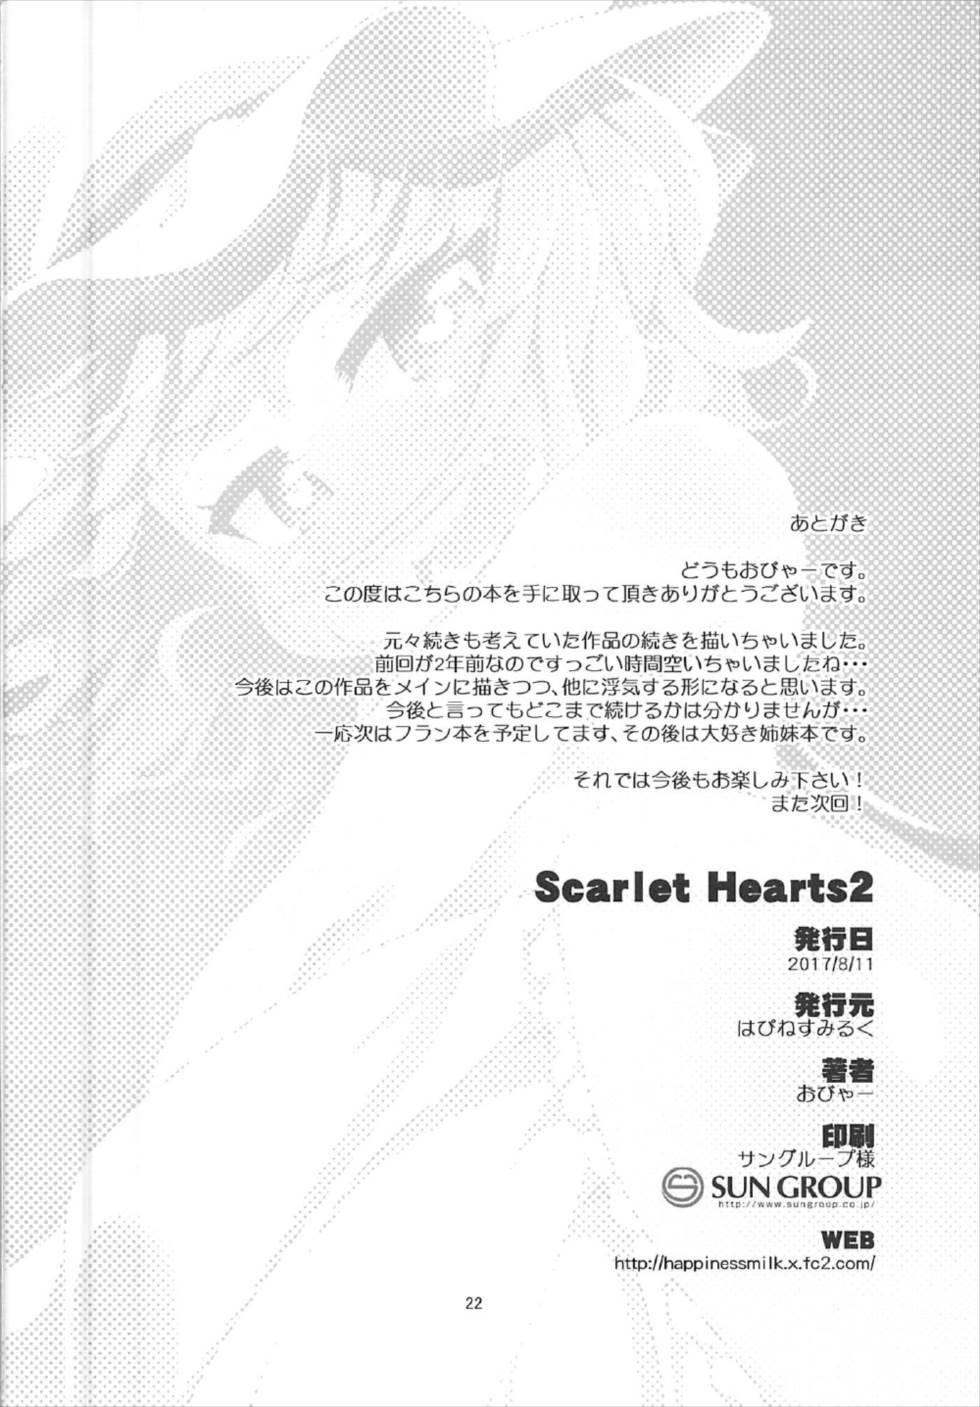 Lesbians Scarlet Hearts 2 - Touhou project Asslicking - Page 22